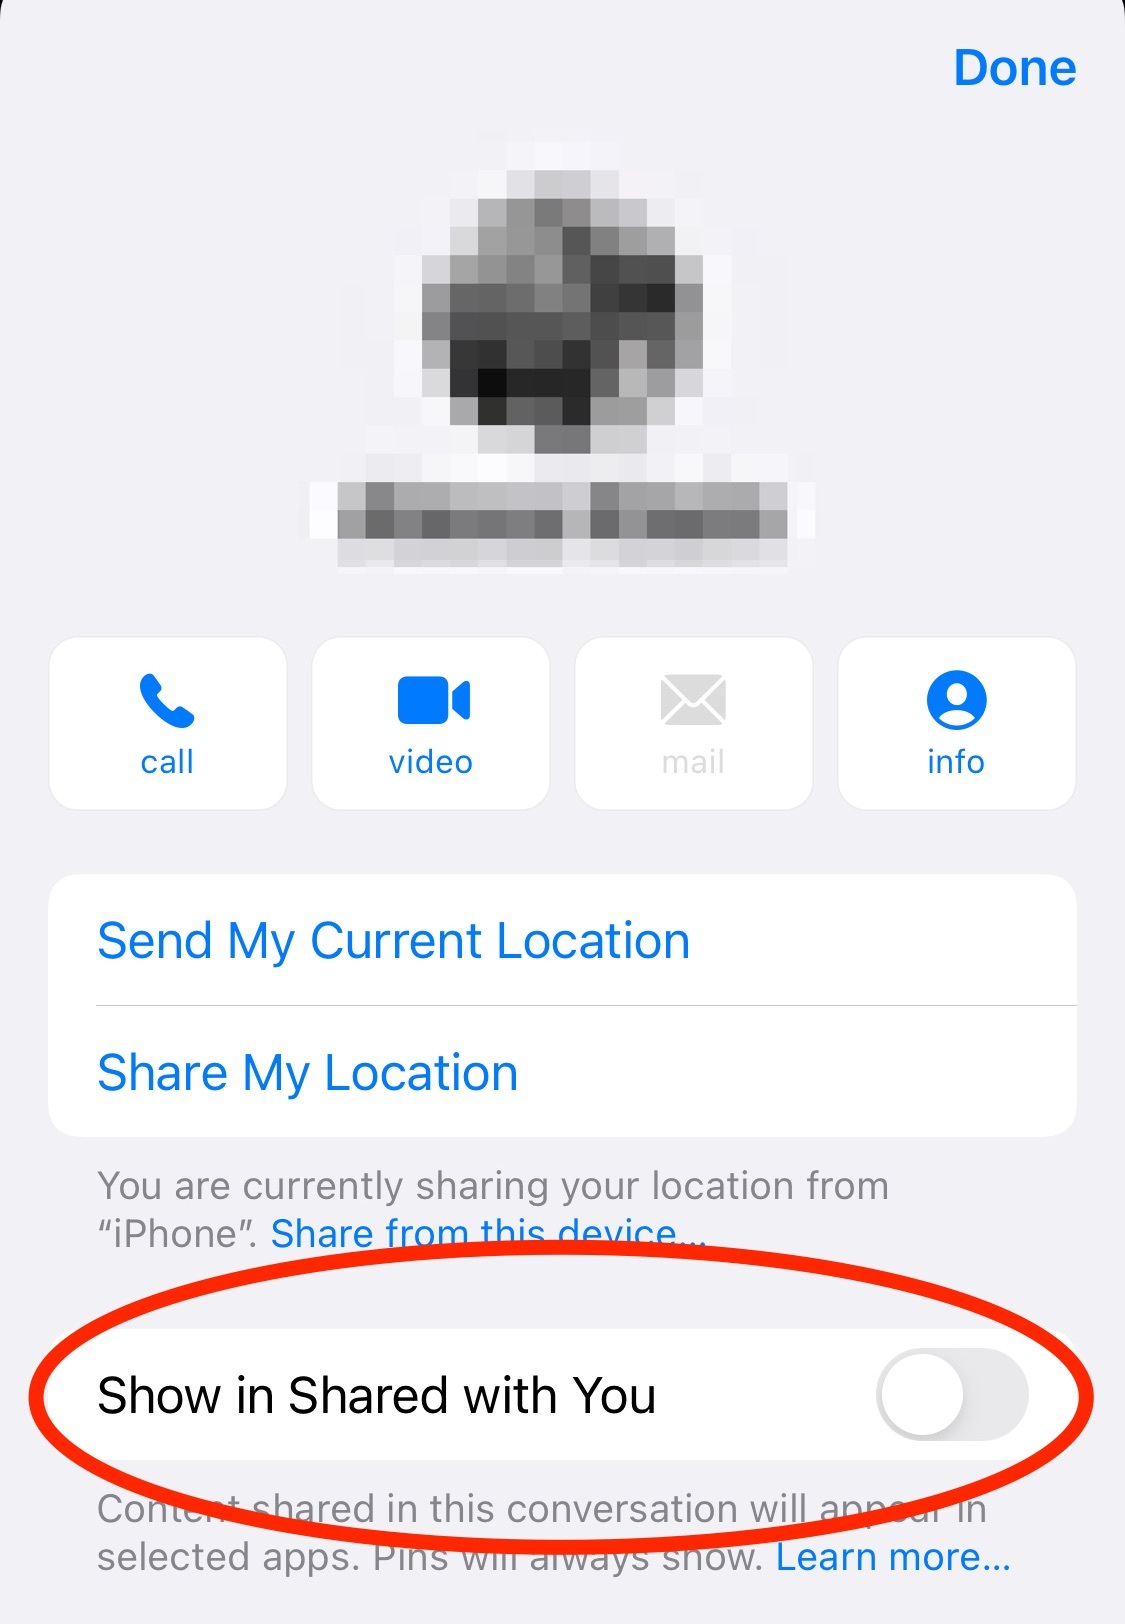 Screenshot of contact showing turn on/off Shared with You feature